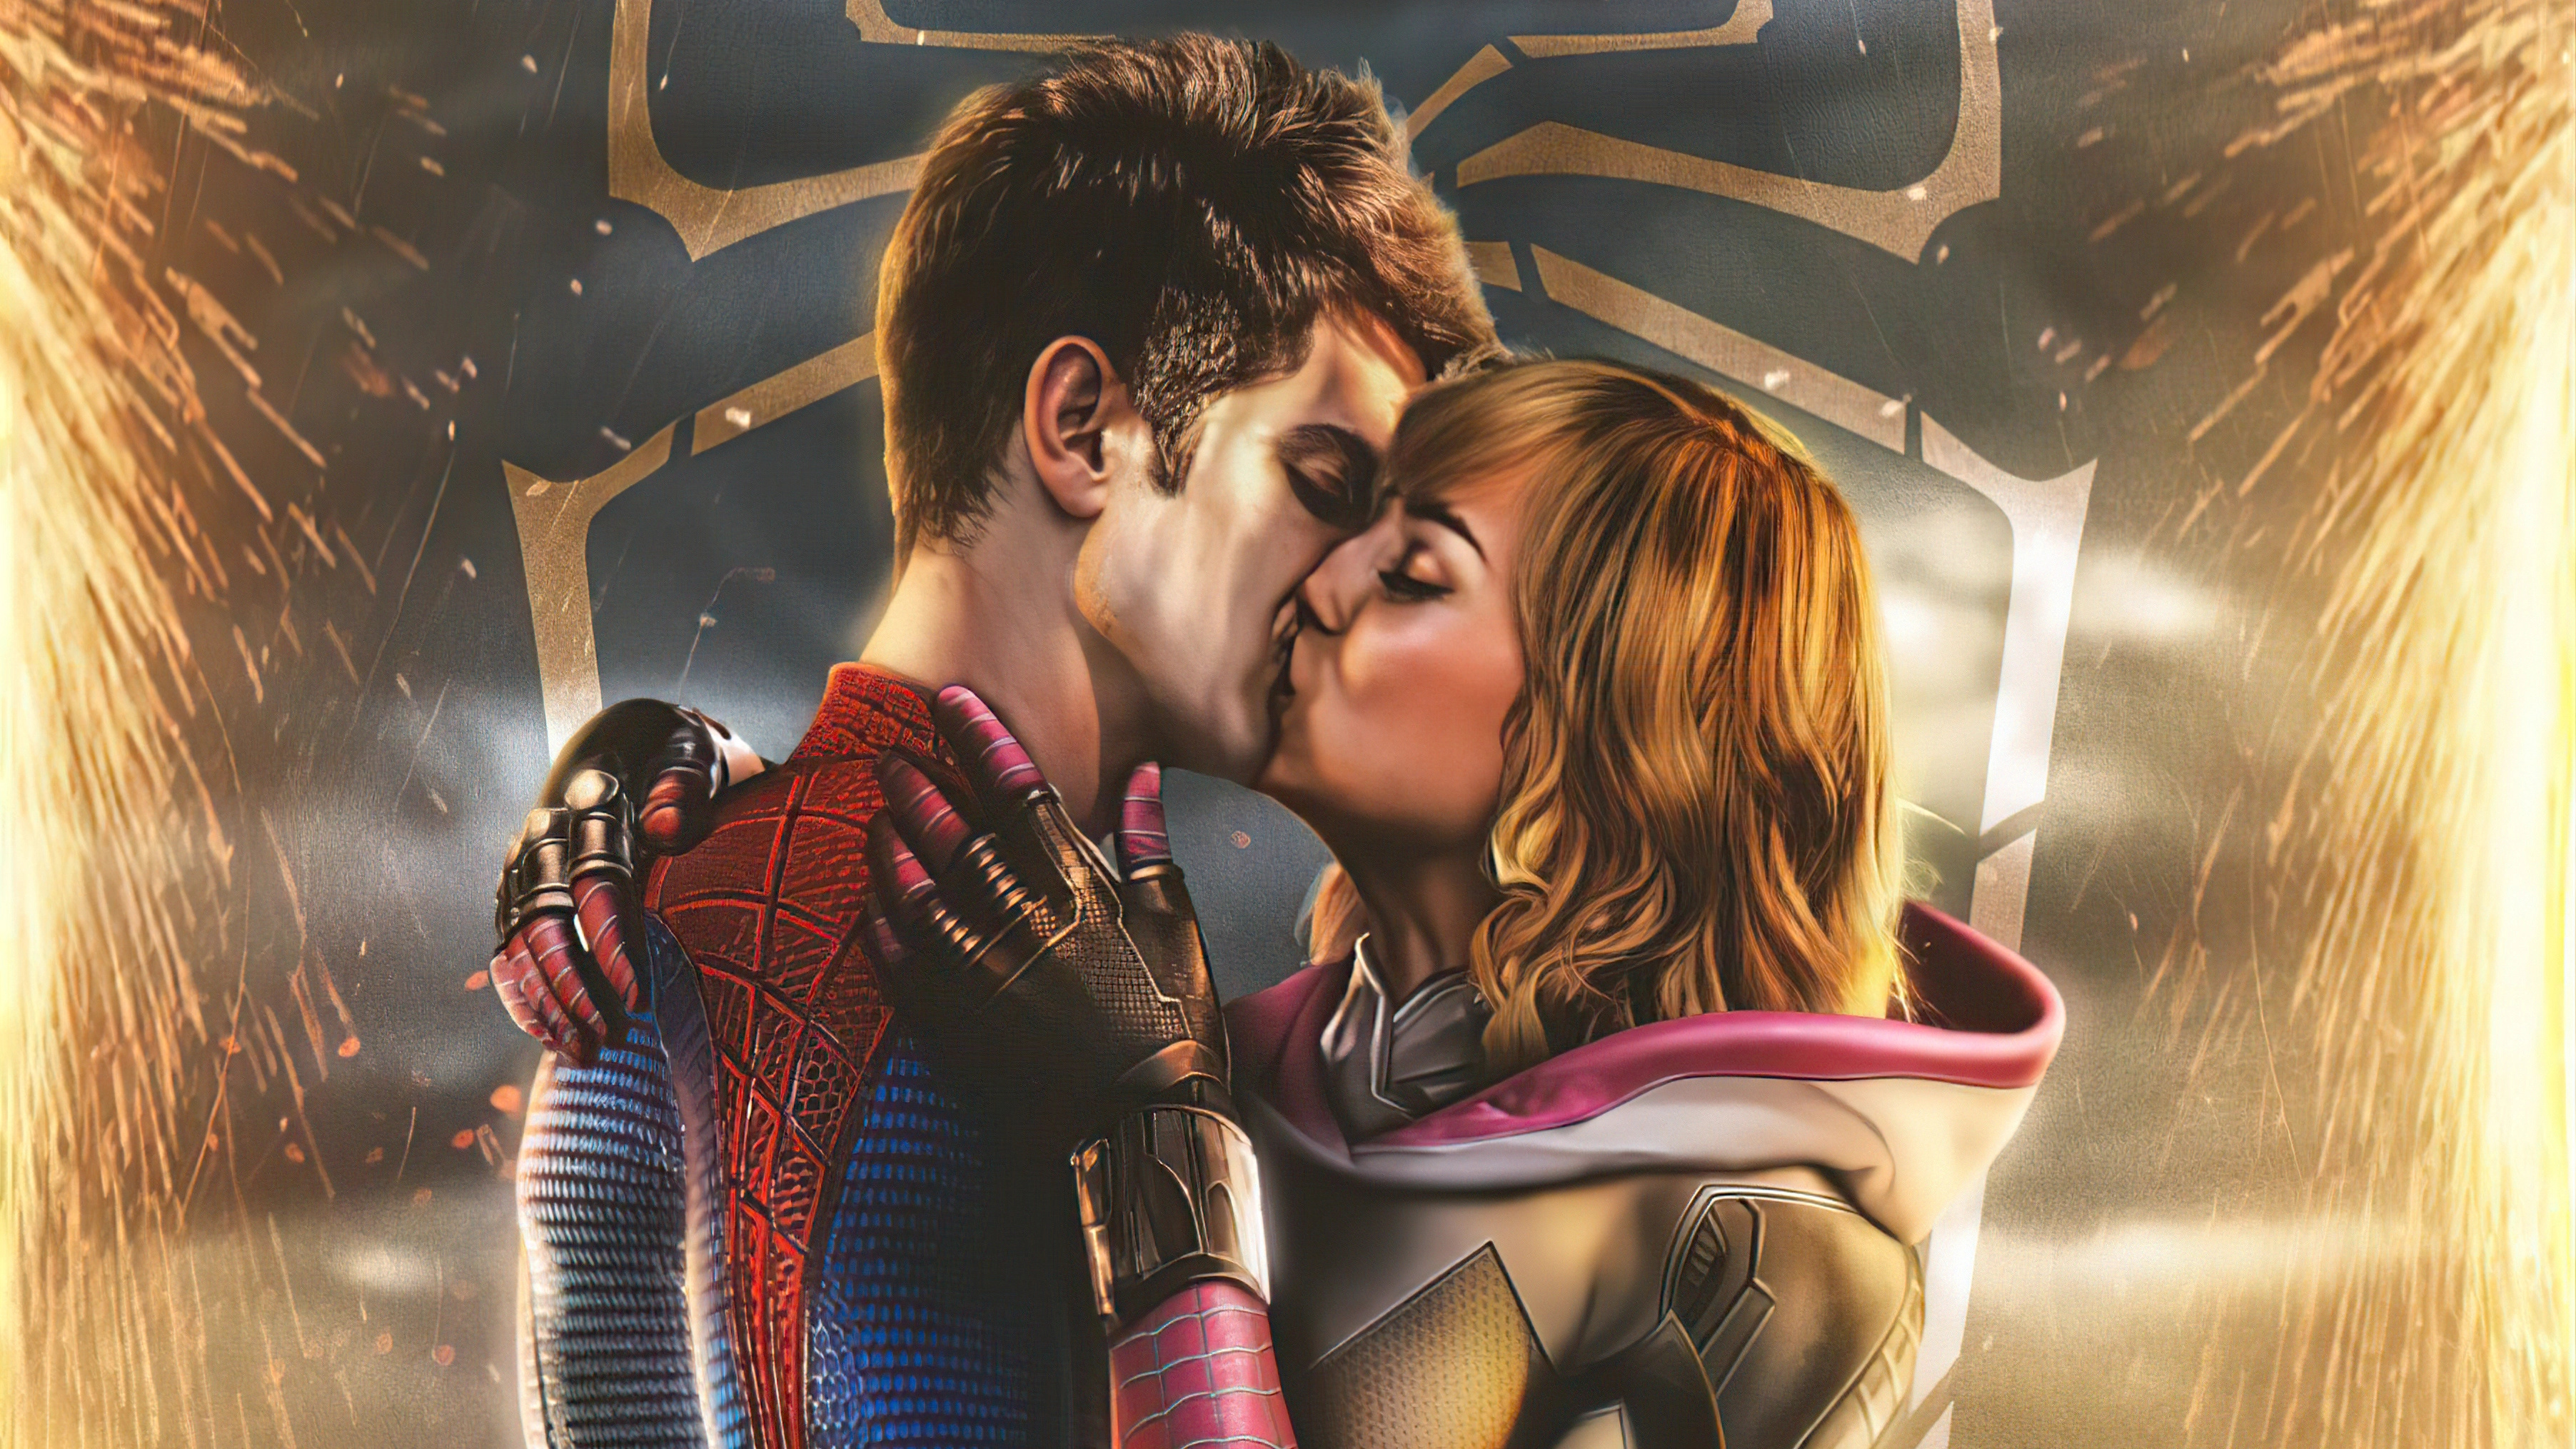 Kissing wallpaper, Intimate moment, Spider-Man and Gwen Stacy, Love and passion, 3610x2030 HD Desktop